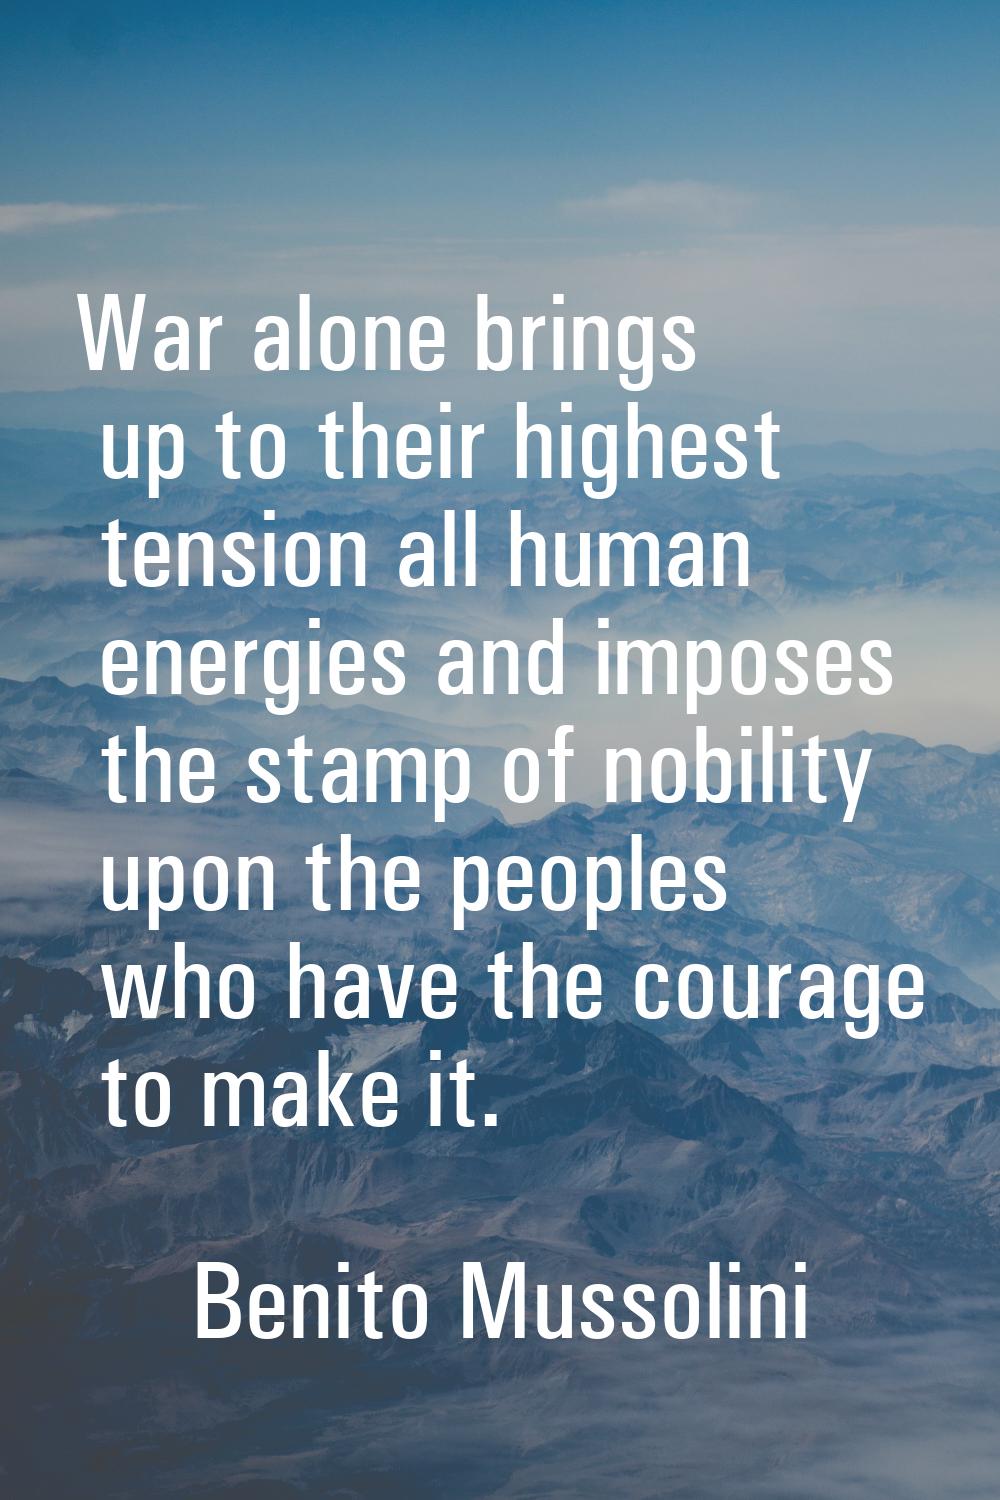 War alone brings up to their highest tension all human energies and imposes the stamp of nobility u